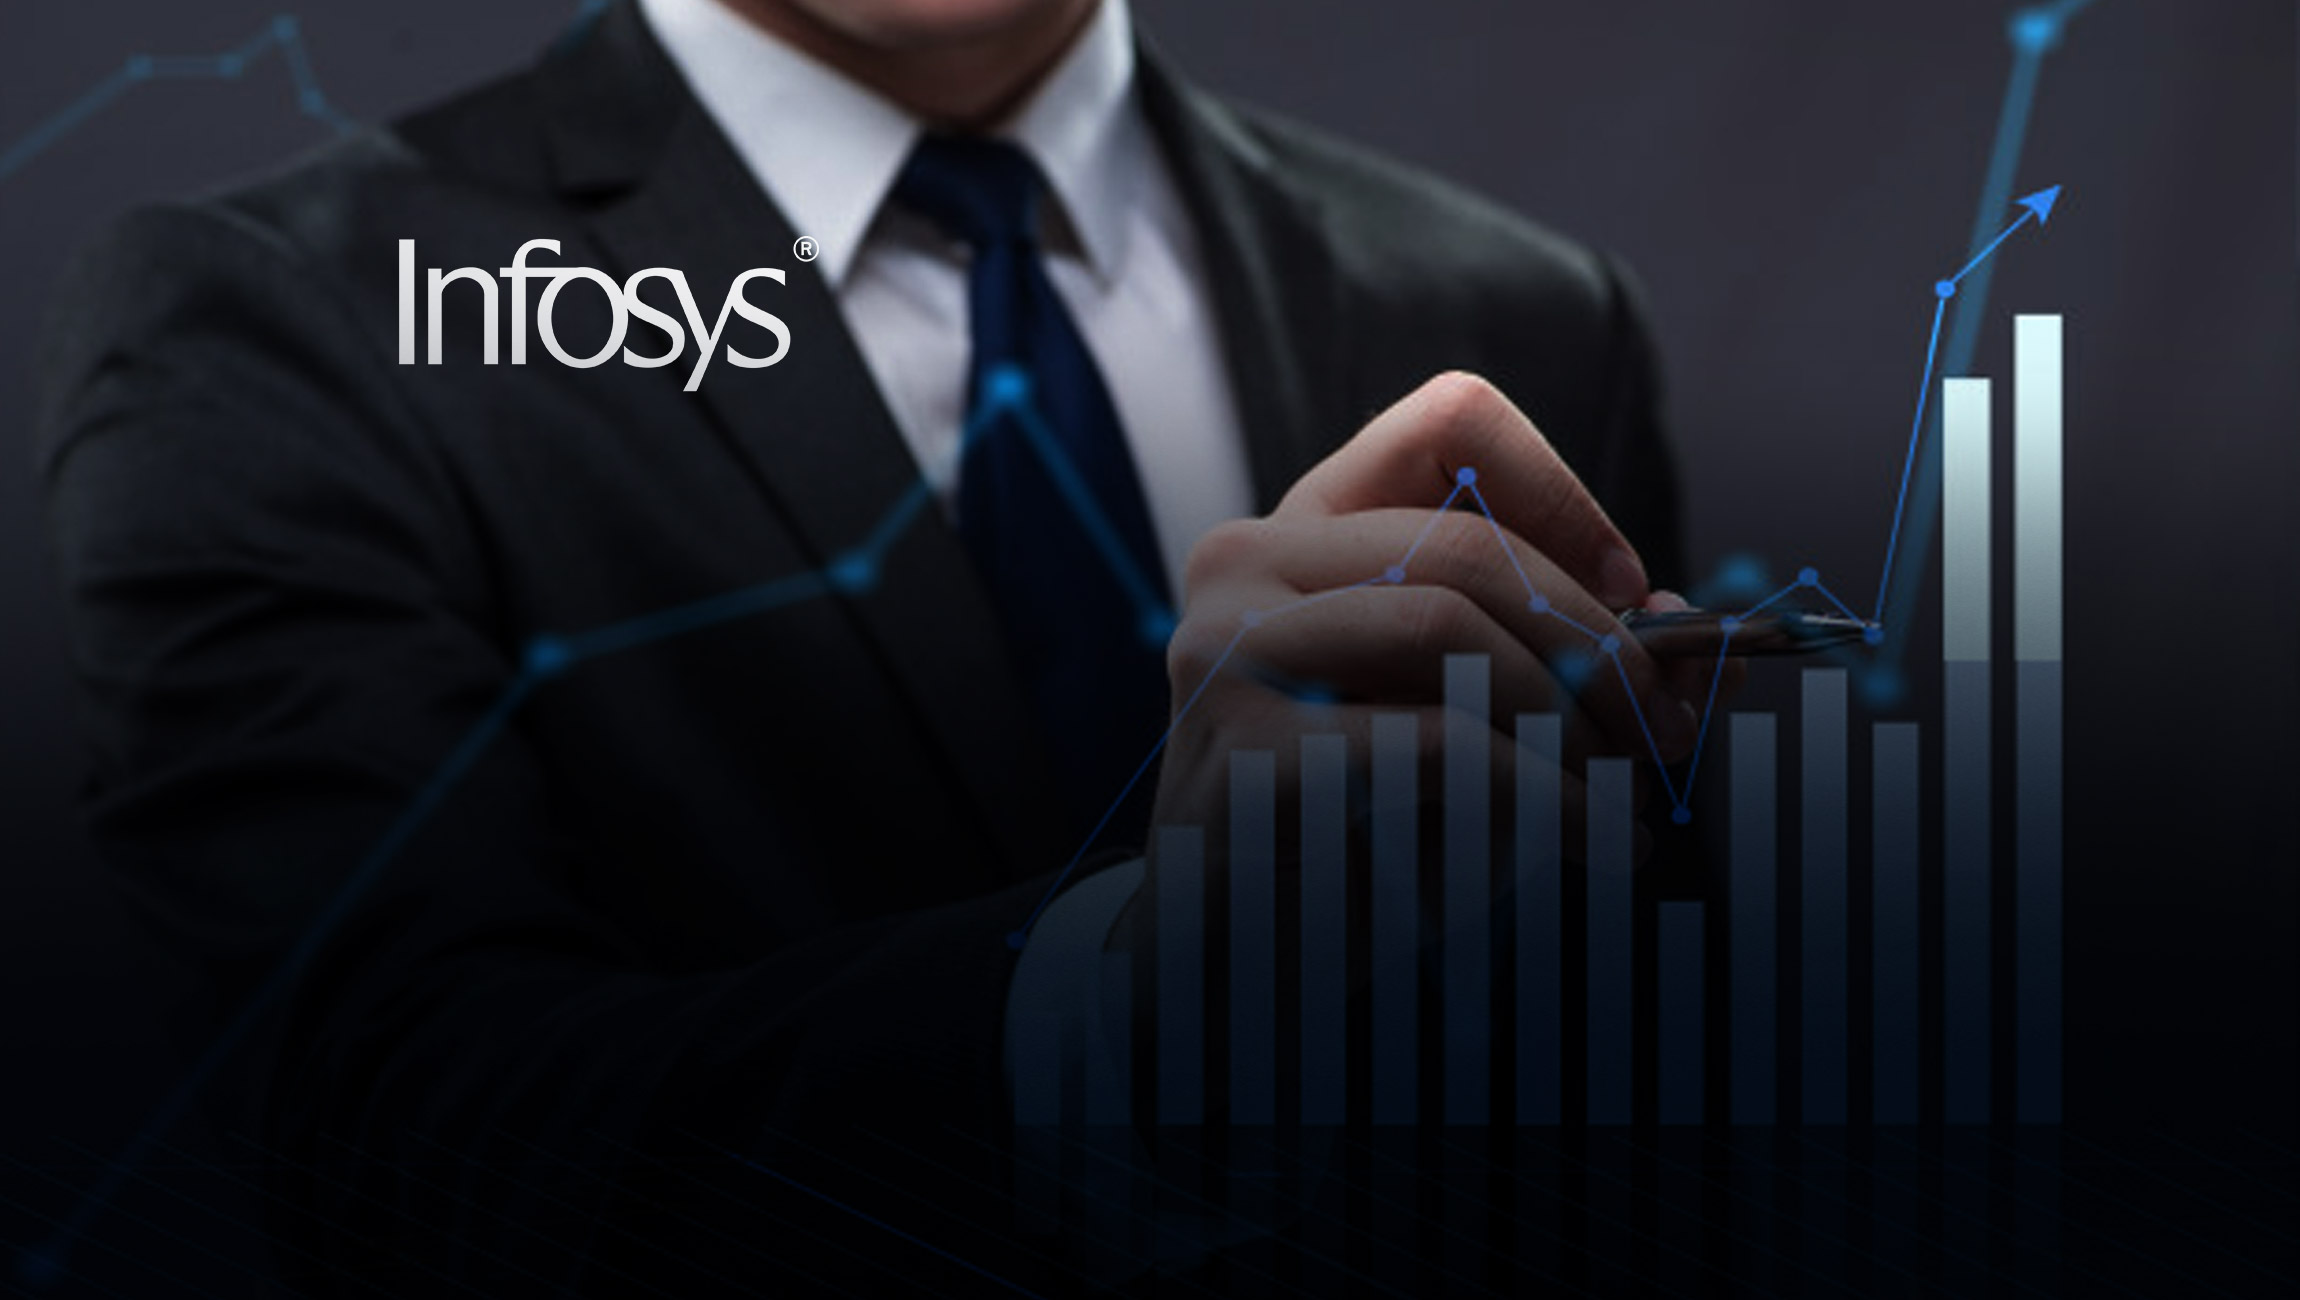 Differentiated Cloud Services and Large Deal Momentum Drive Infosys' Highest Annual Growth in a Decade